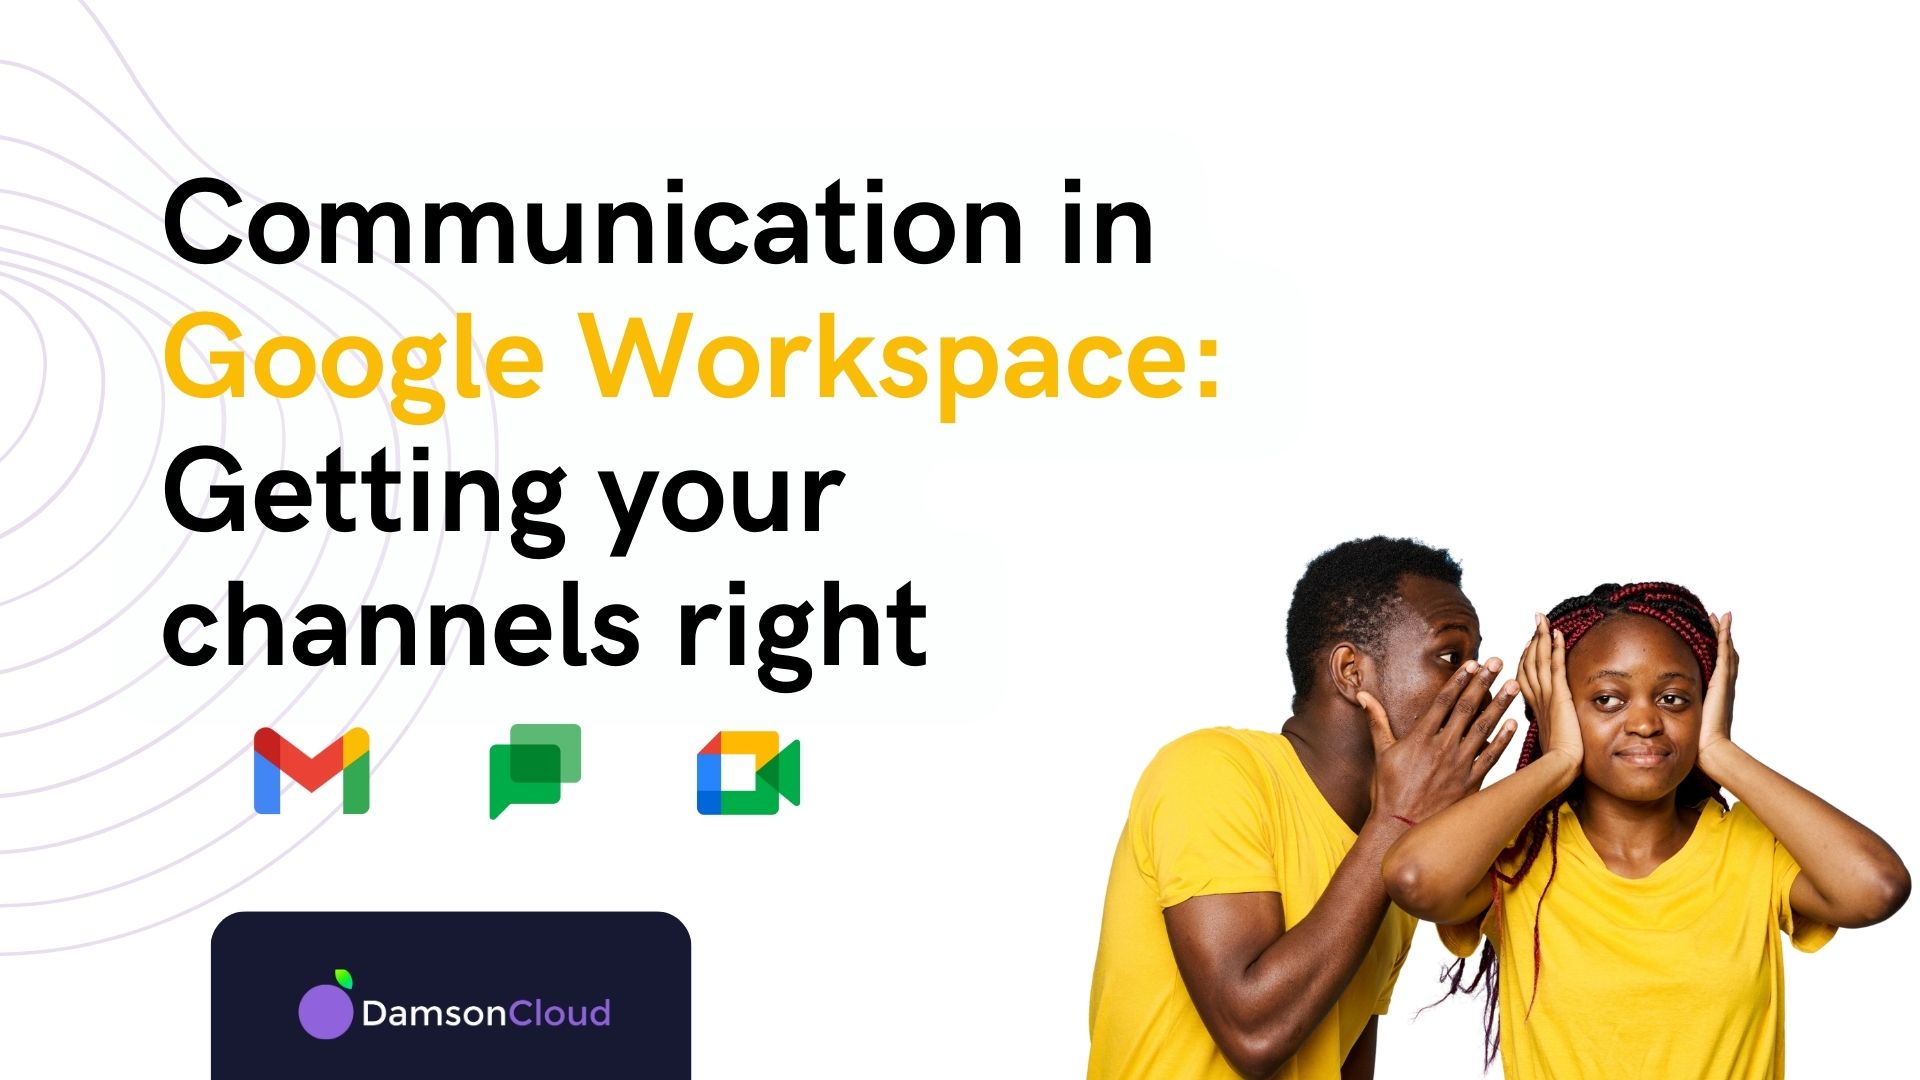 Communication in Google Workspace: Getting your channels right